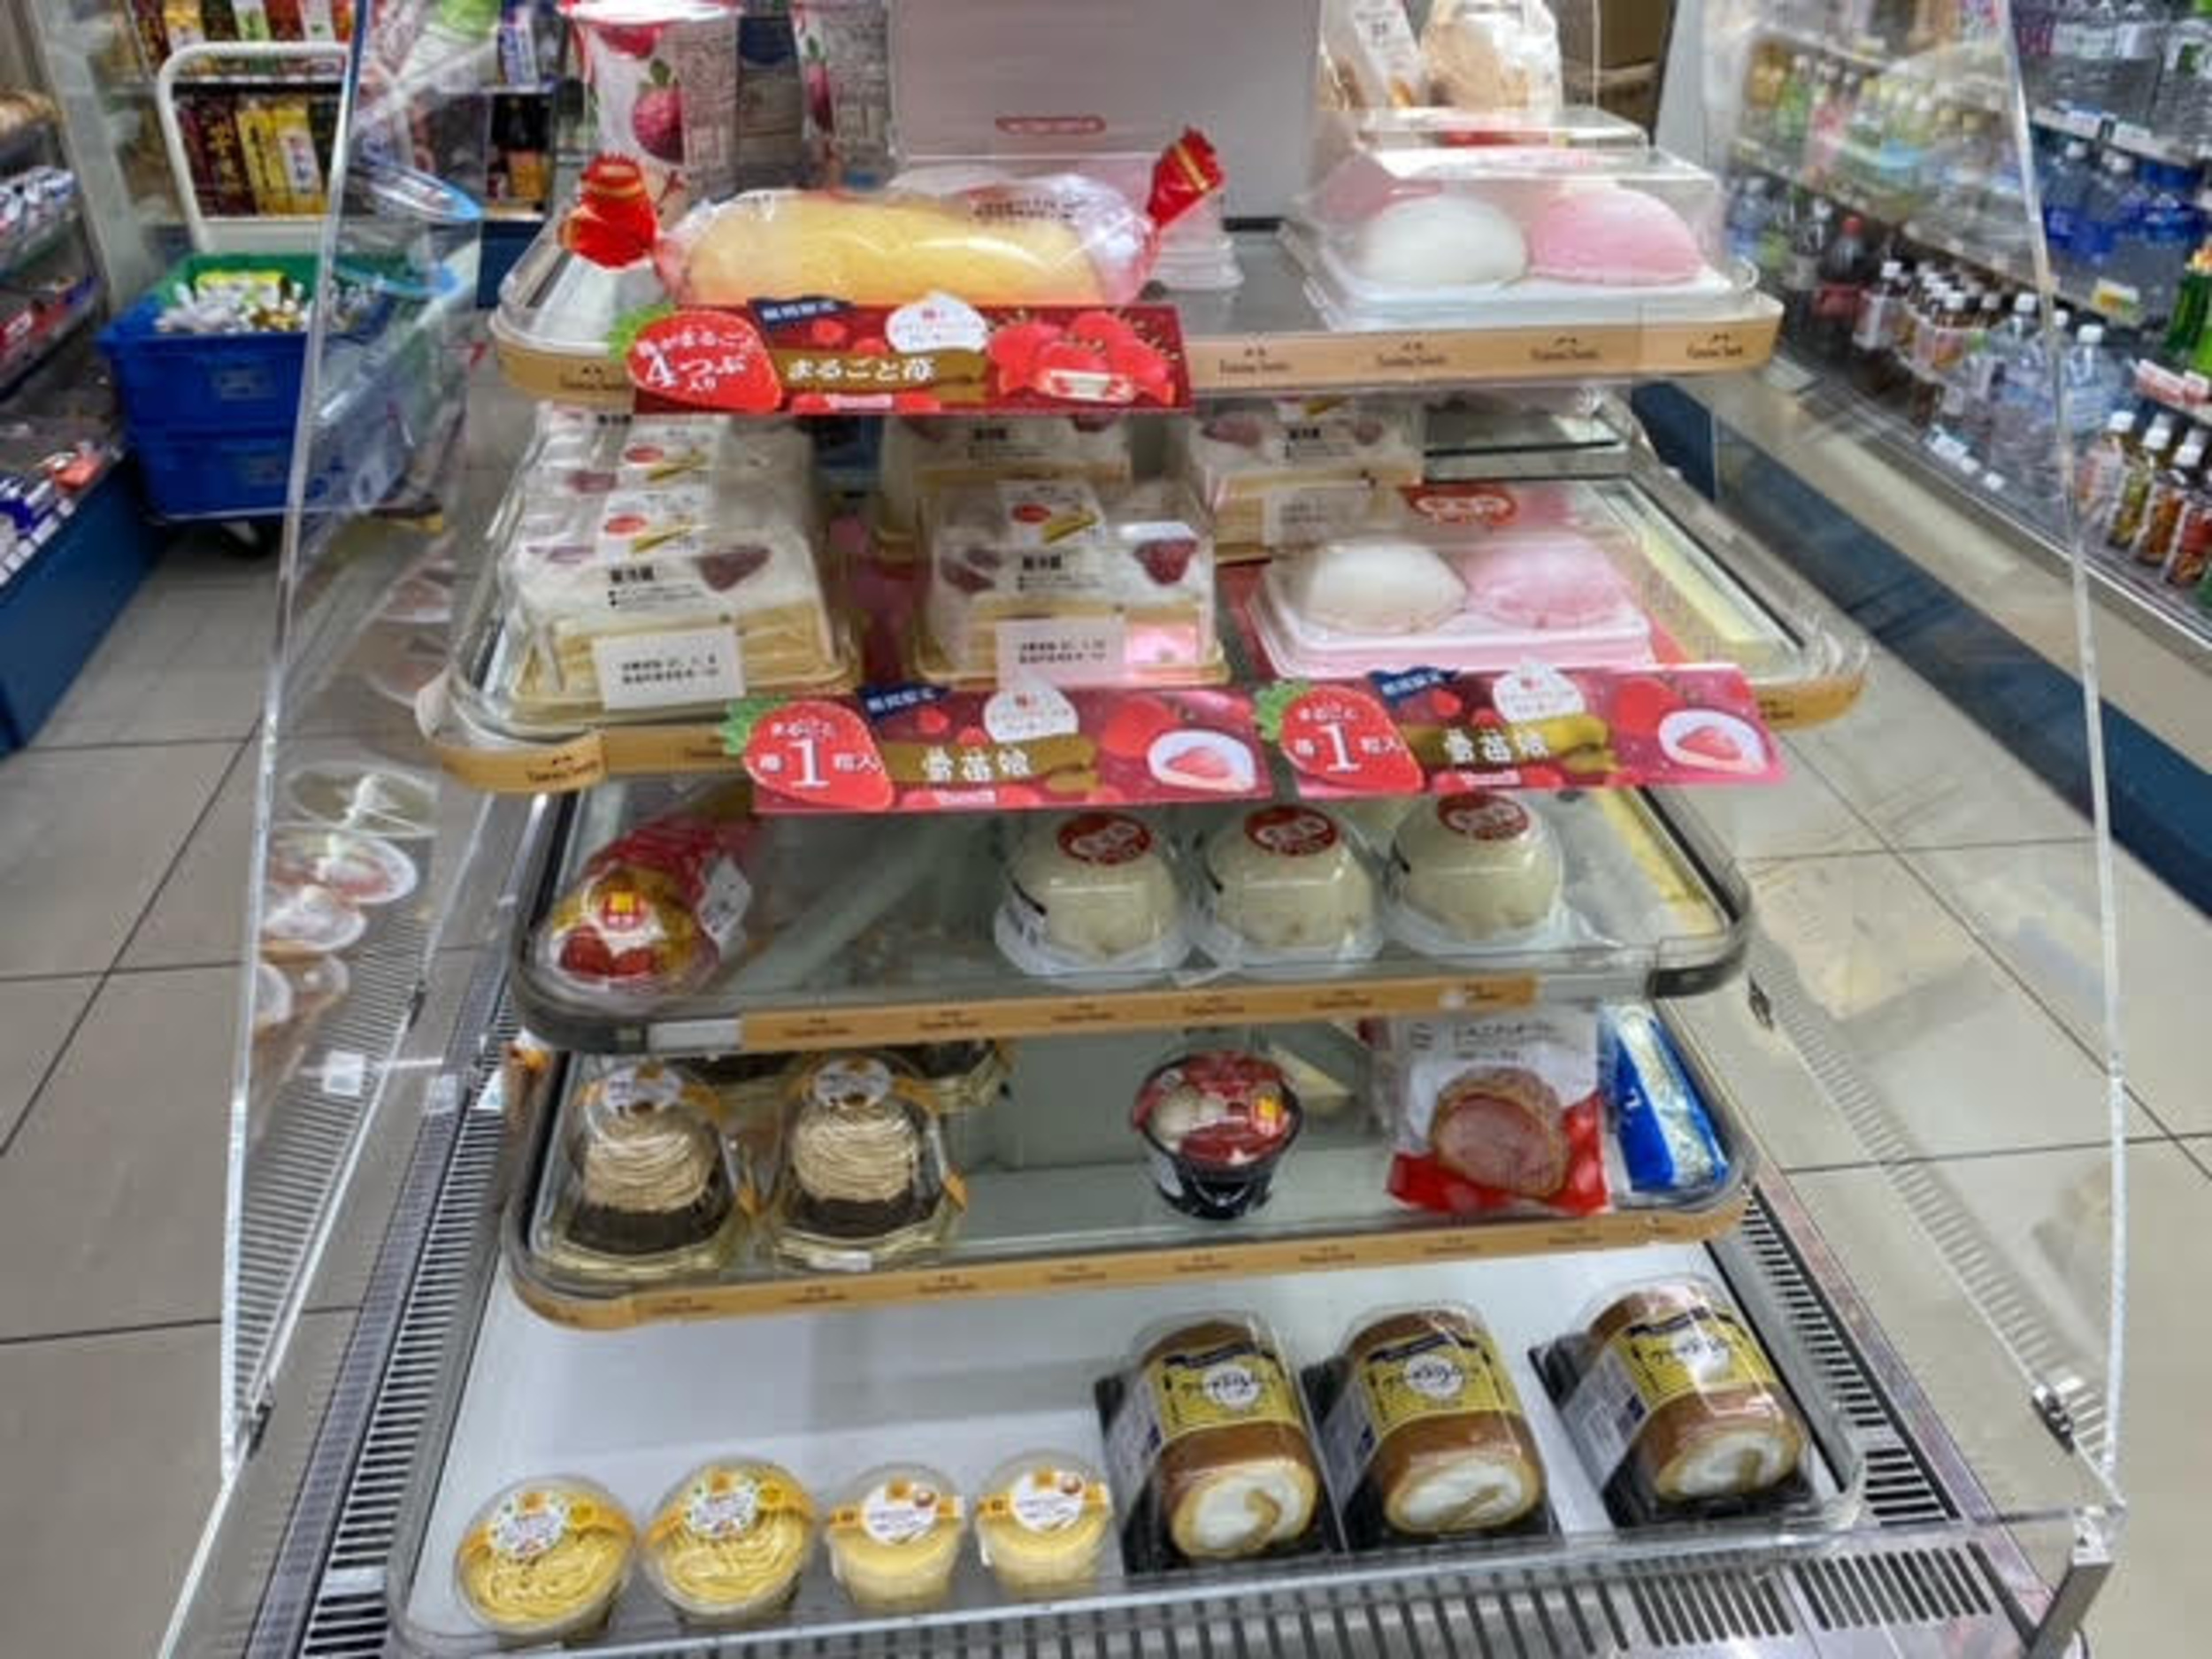 <p>Try one of the pastries at the local convenience stores, especially the ones that look like puff balls. This might sound insane. In one of the culinary capitals of the world, I'm asking you to eat cheap food at a convenience store. But those rich, savory Tokyo pastries are still on my mind to this day.</p><p><a href='https://www.msn.com/en-us/community/channel/vid-cj9pqbr0vn9in2b6ddcd8sfgpfq6x6utp44fssrv6mc2gtybw0us'>Follow us on MSN to see more of our exclusive lifestyle content.</a></p>